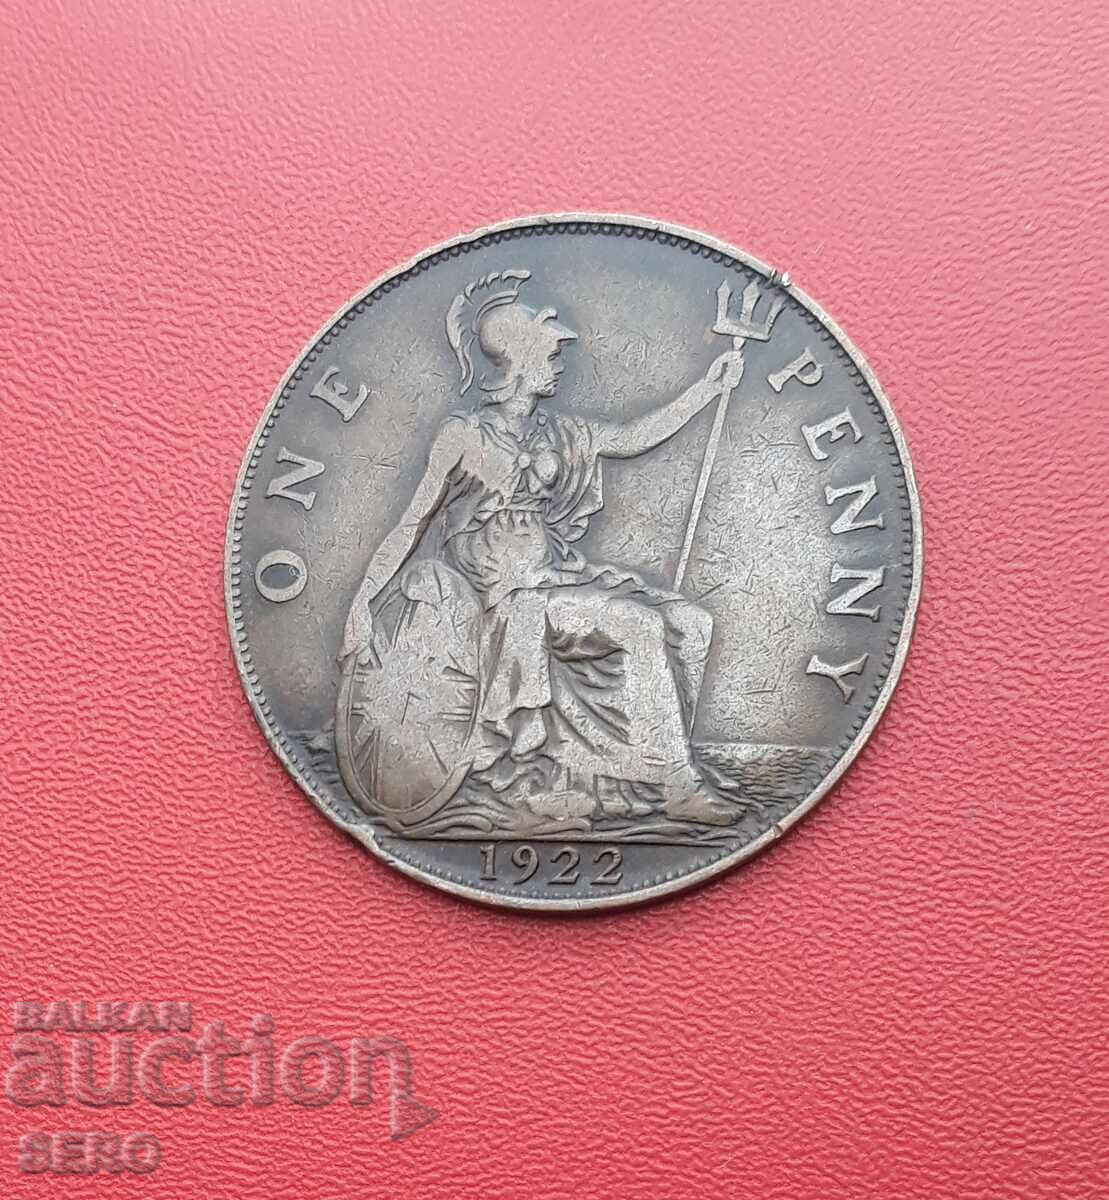 Great Britain - 1 penny 1922